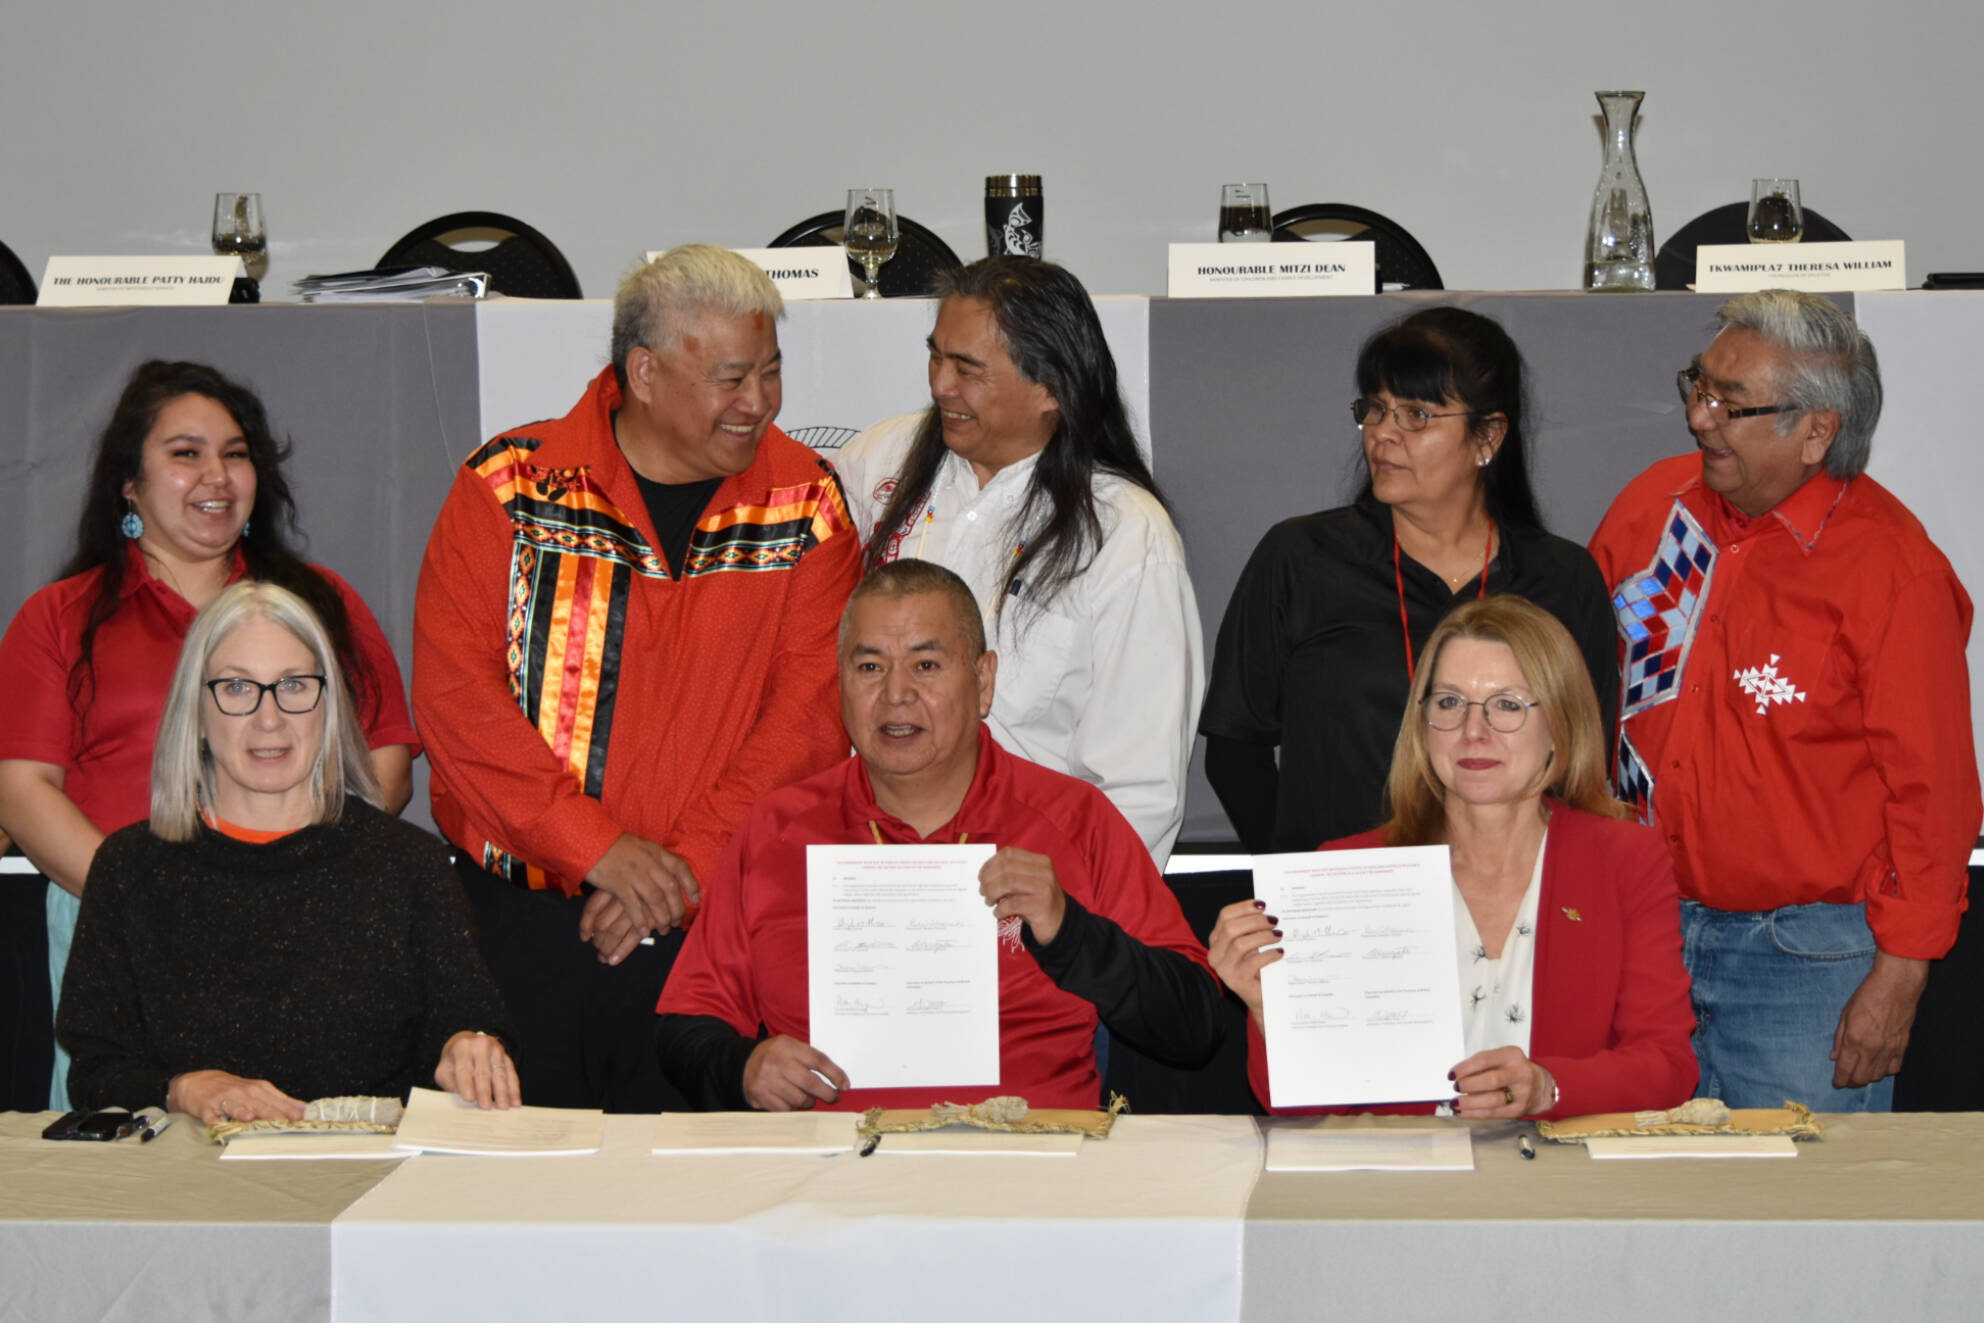 (Left to right) Splatsin Tkwamipla7 Sabrina Vergata, Wenecwtsin Wayne Christian, Elder George William, and Tkwamipla7 (councillors) Theresa William and Leonard Edwards look on as (front, left to right) Federal Minister of Indigenous Services Patty Hajdu, Splatsin Kukpi7 Doug Thomas and B.C. Minister of Children and Family Development Mitzi Dean hold up the signed coordination agreement. Federal and provincial officials, Kukpi7 Thomas and all Tkwamipla7 members signed the agreement. (Rebecca Willson/ Eagle Valley News)